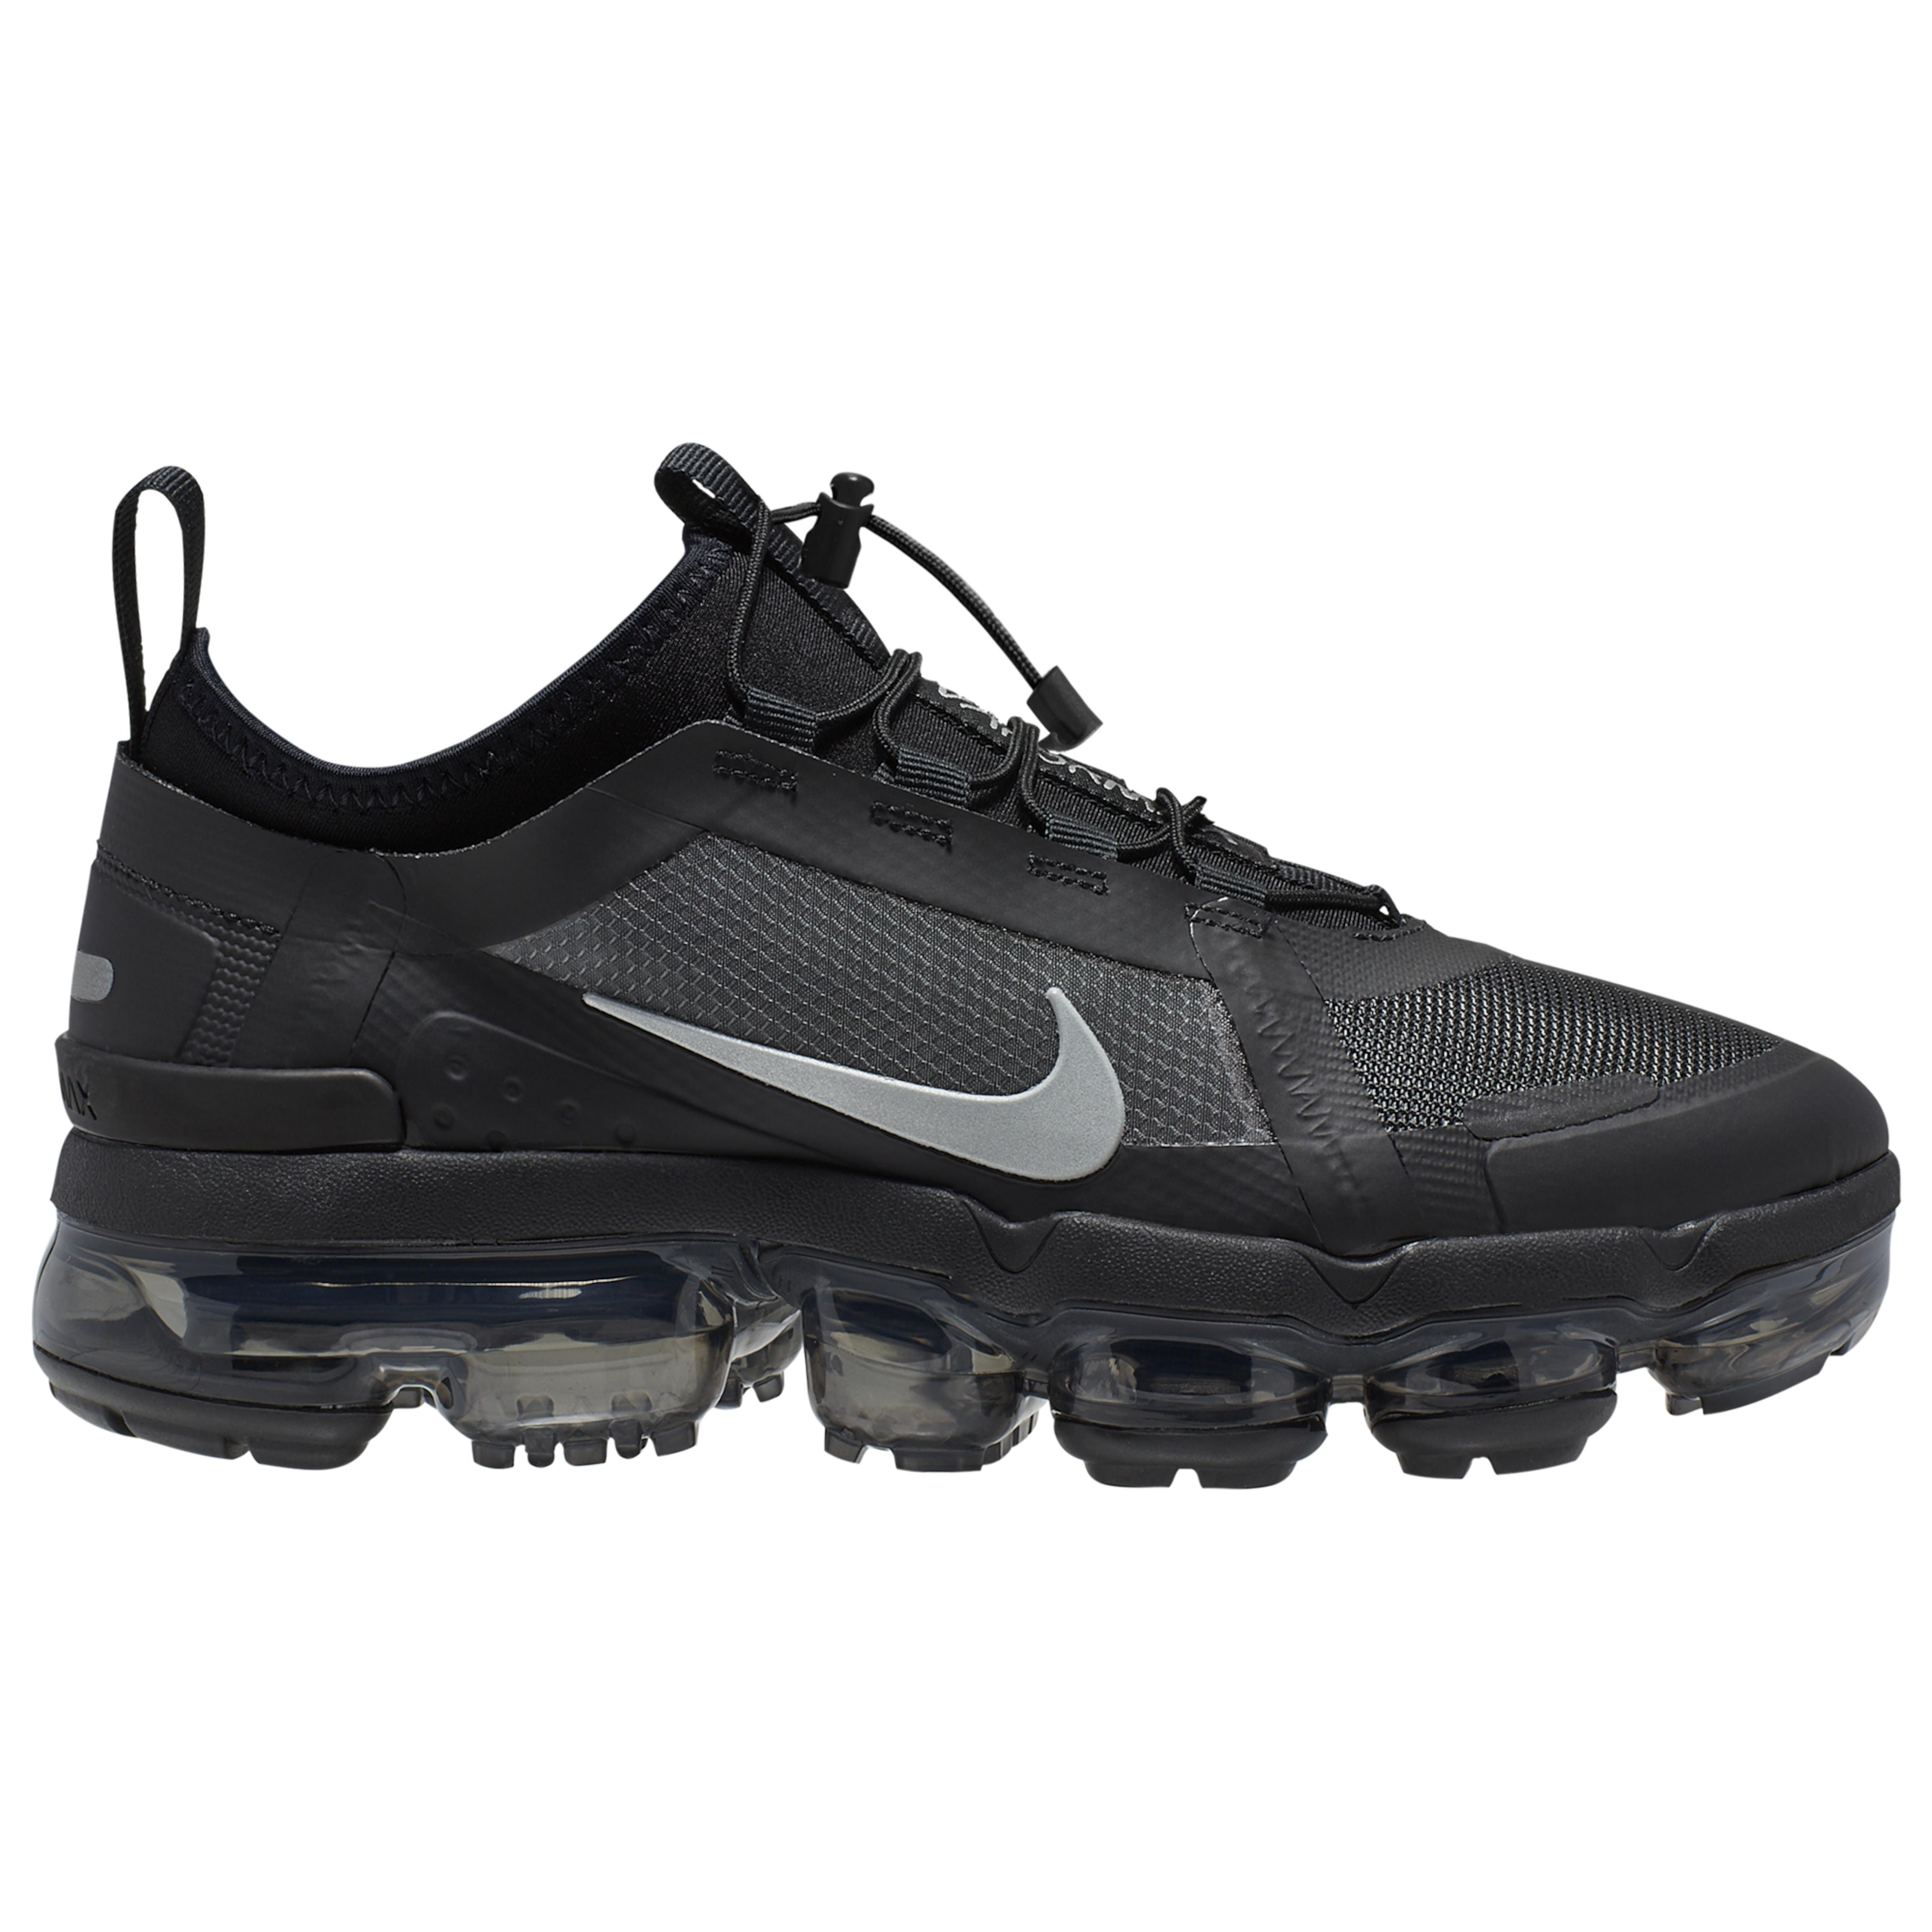 Nike Neoprene Air Vapormax 2019 Utility Running Shoes in Black/ Silver/  White (Black) - Save 53% - Lyst